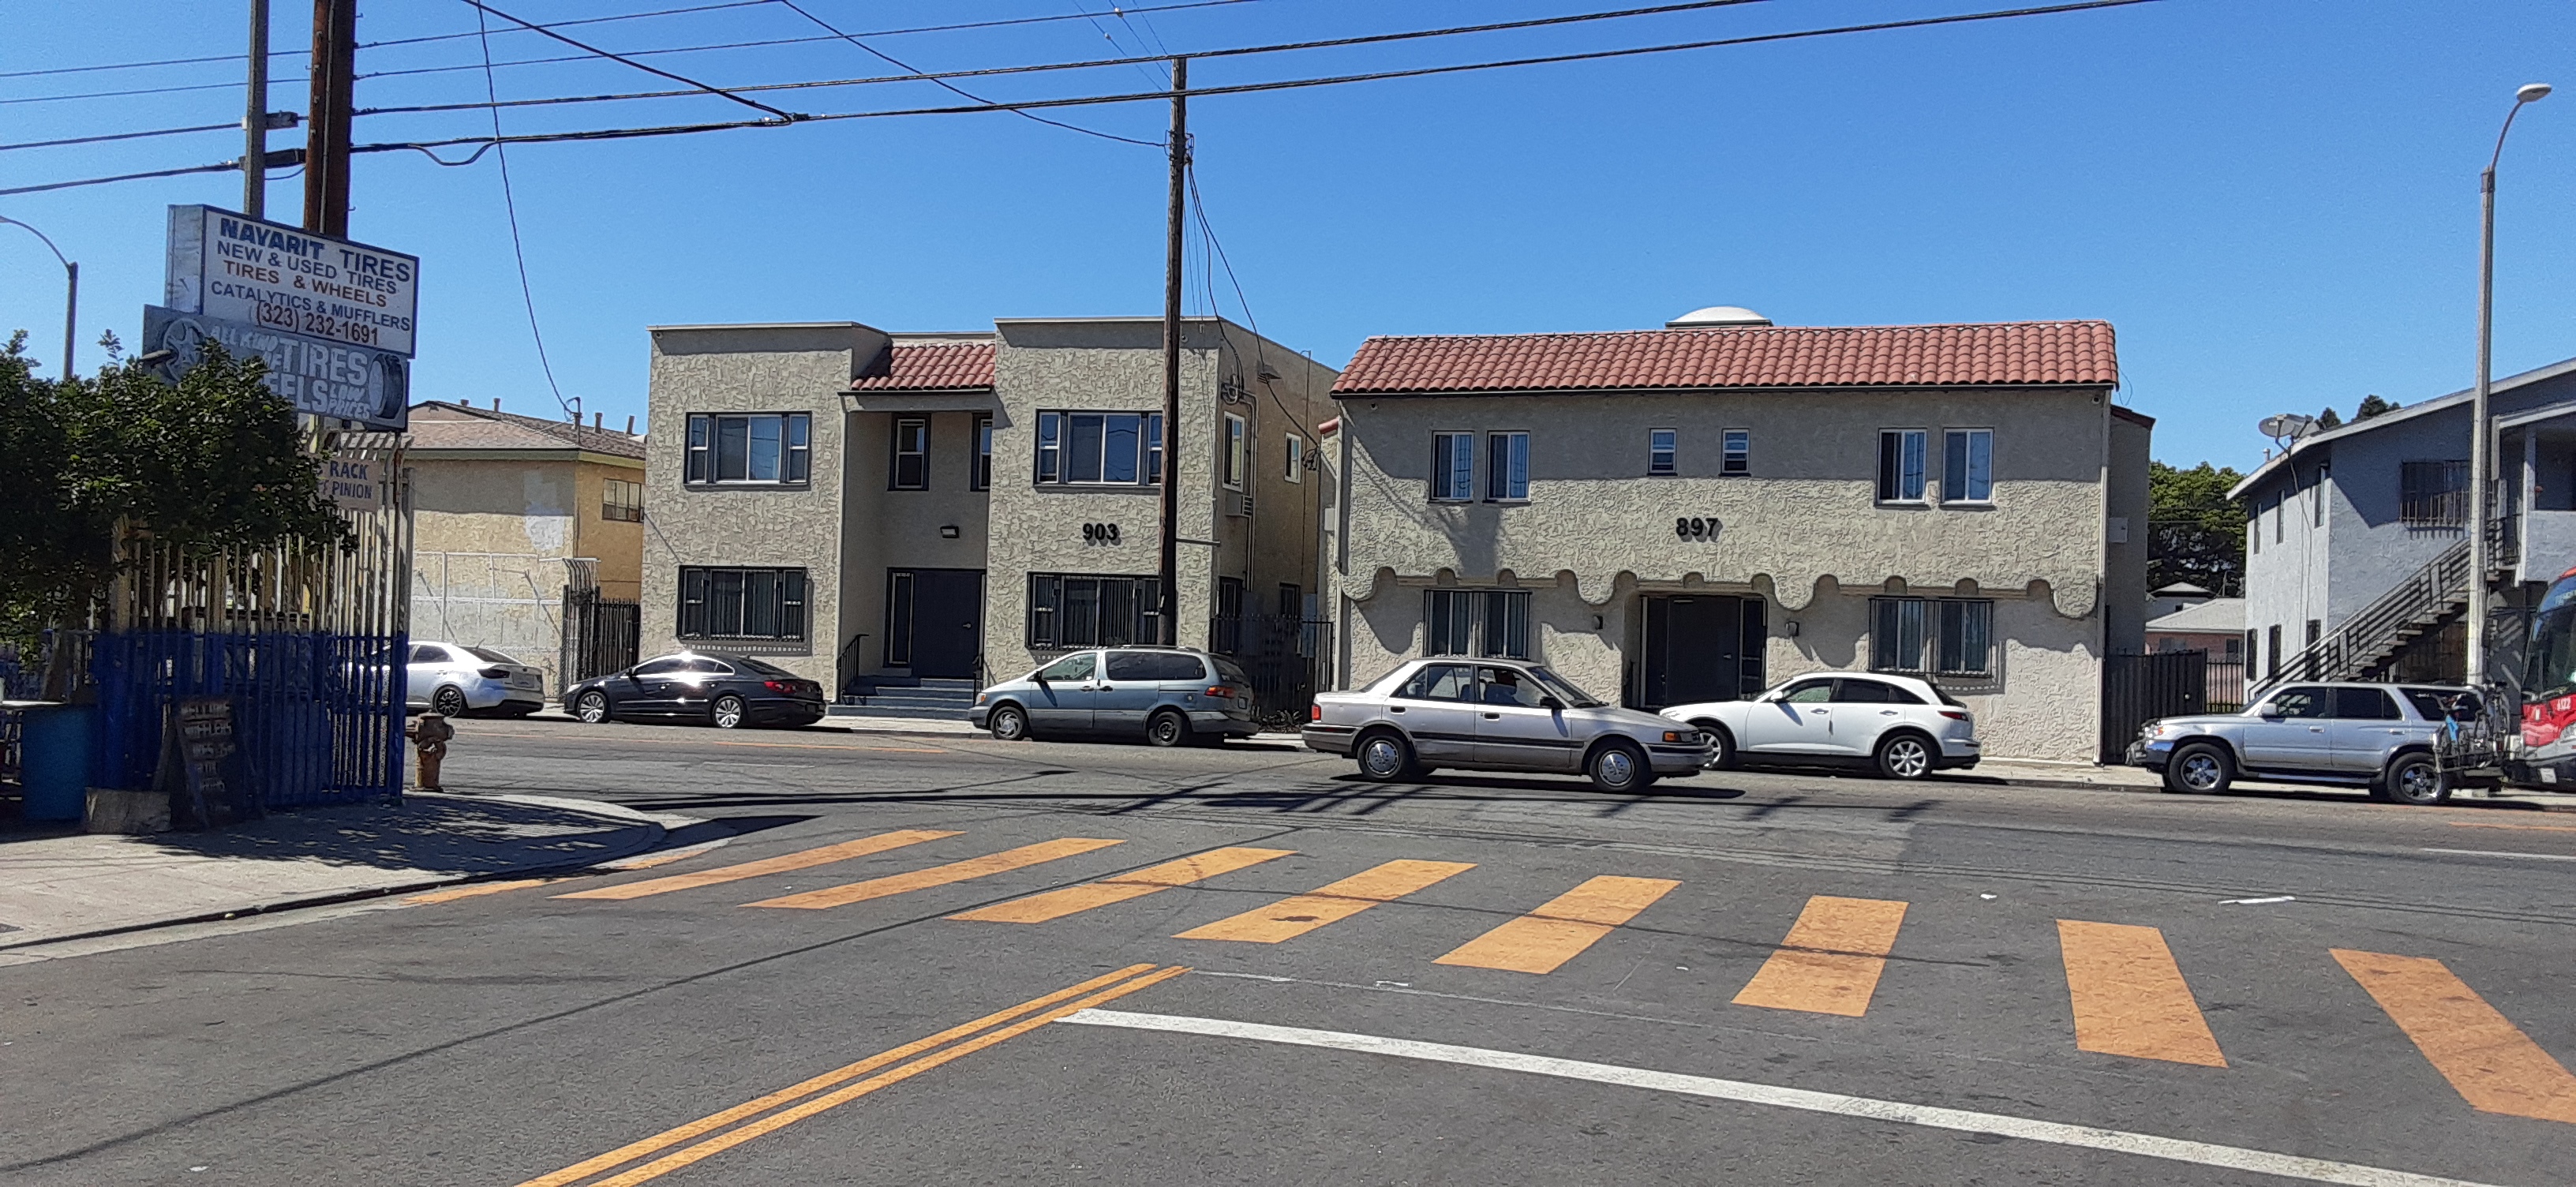 Front view of two beige 2 story buildings next to each other with a black steel gate in the middle, multiple windows on both building, the bottom ones gated, front doors with black steel handrails, five cars parked in front of the buildings, one car drivi